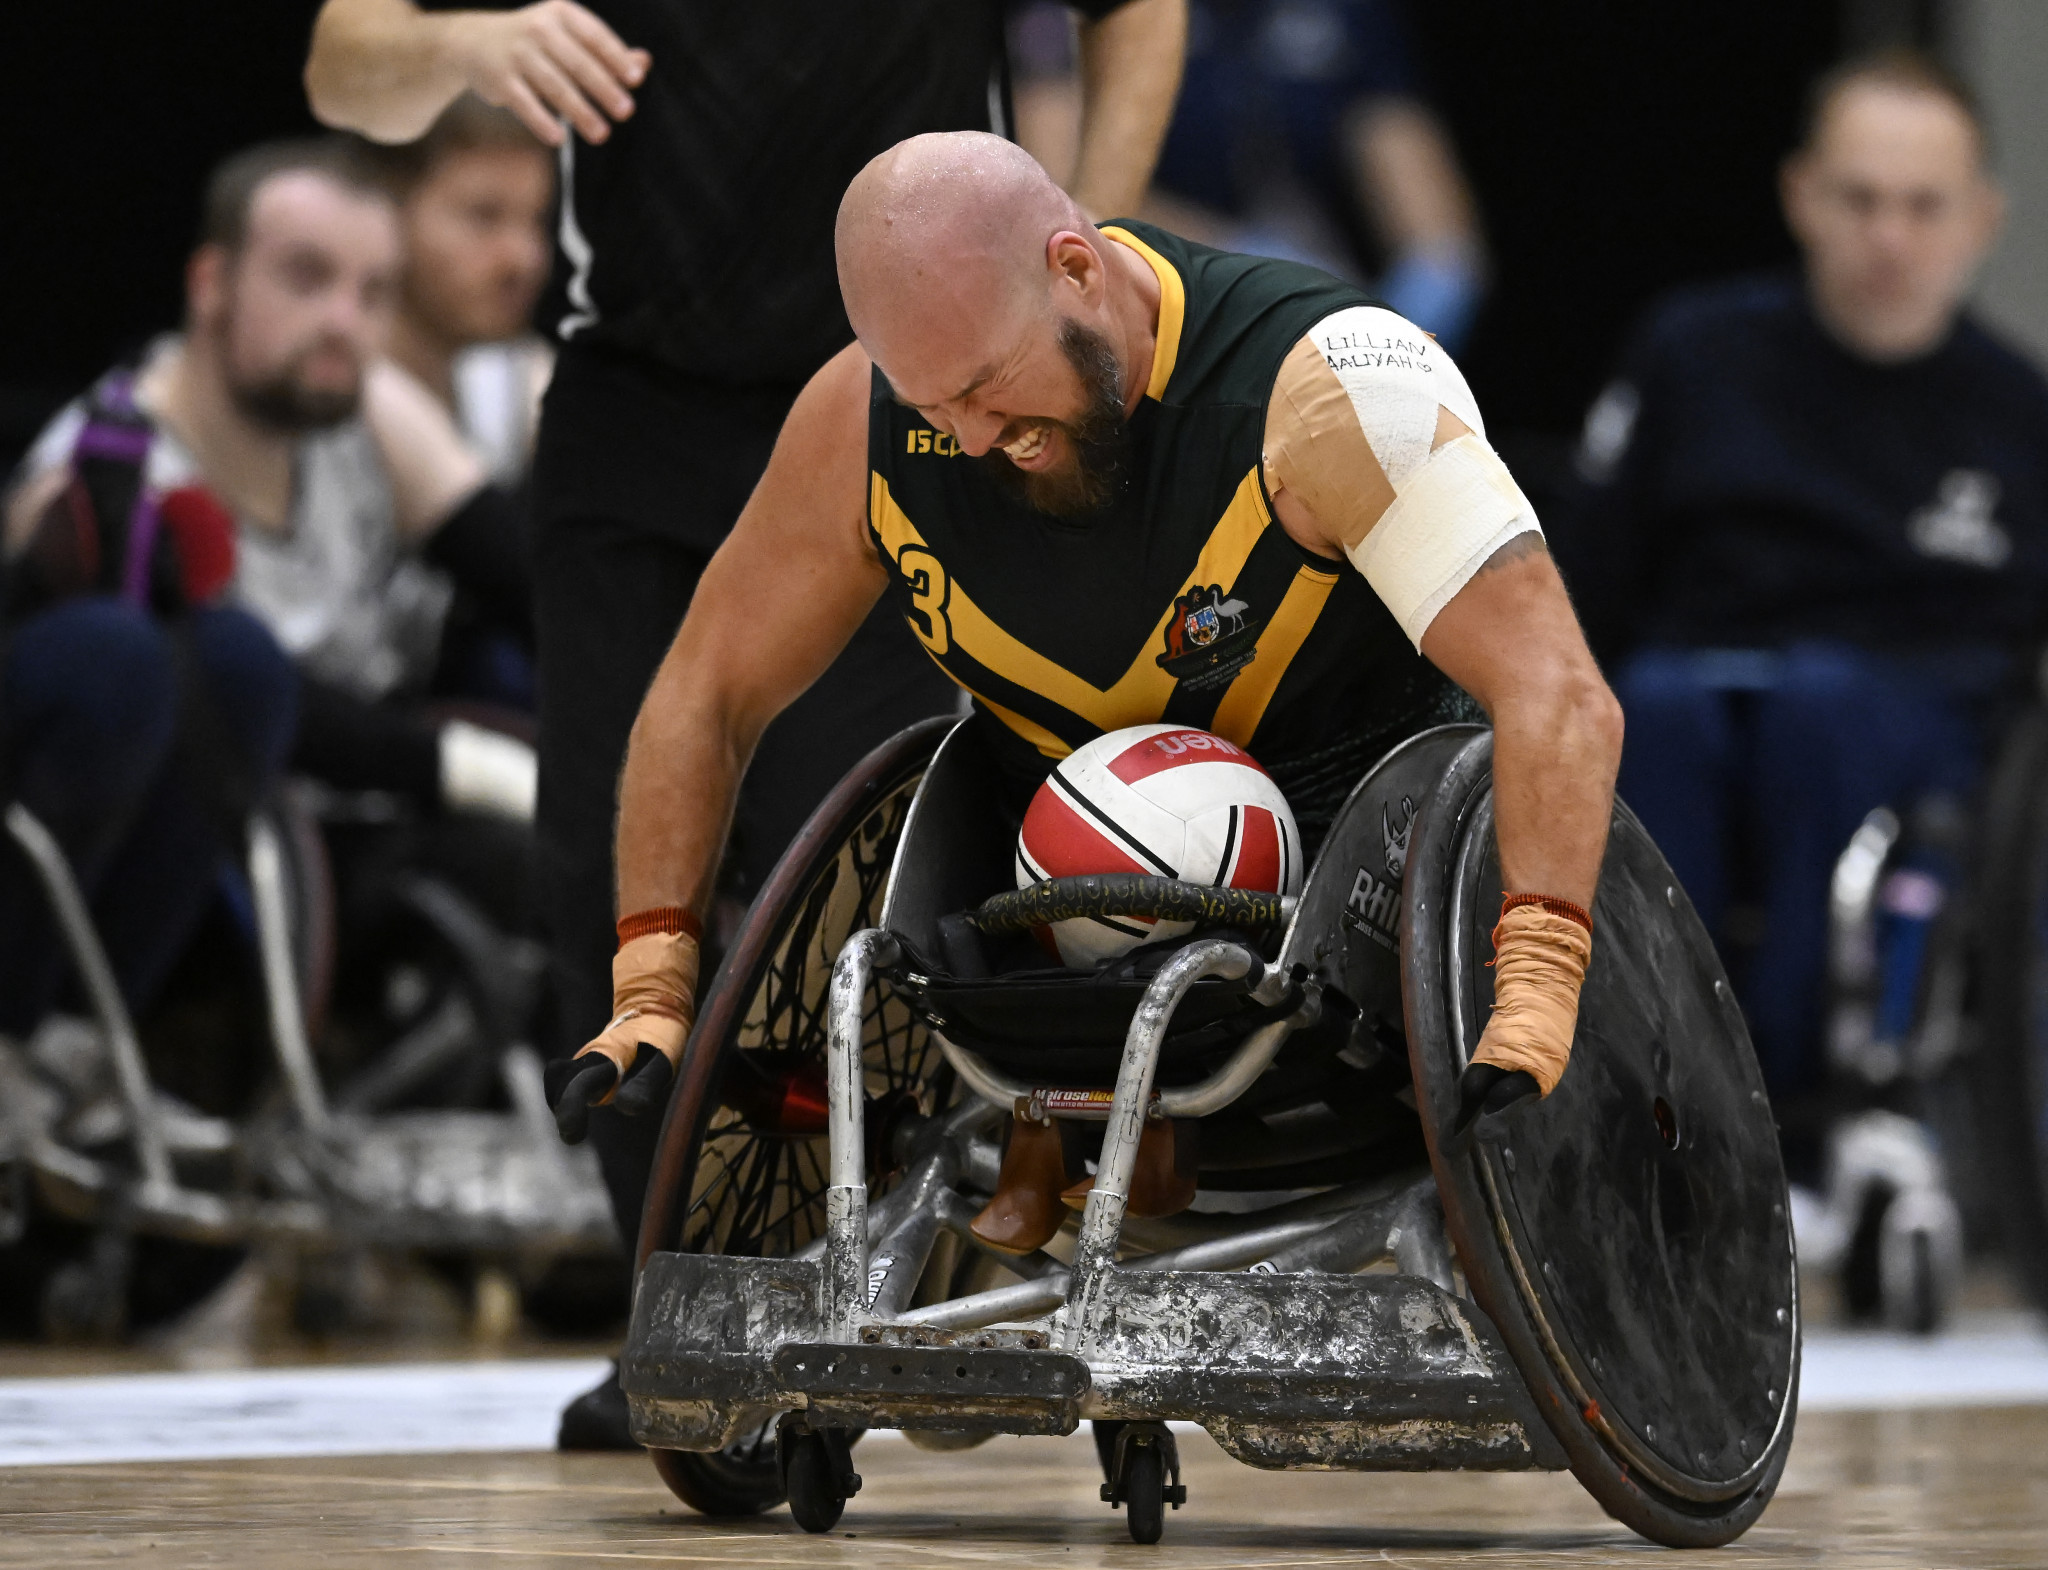 Australia pulled off a hard-fought victory against Paralympic champions Britain ©Lars Møller/Parasport Denmark